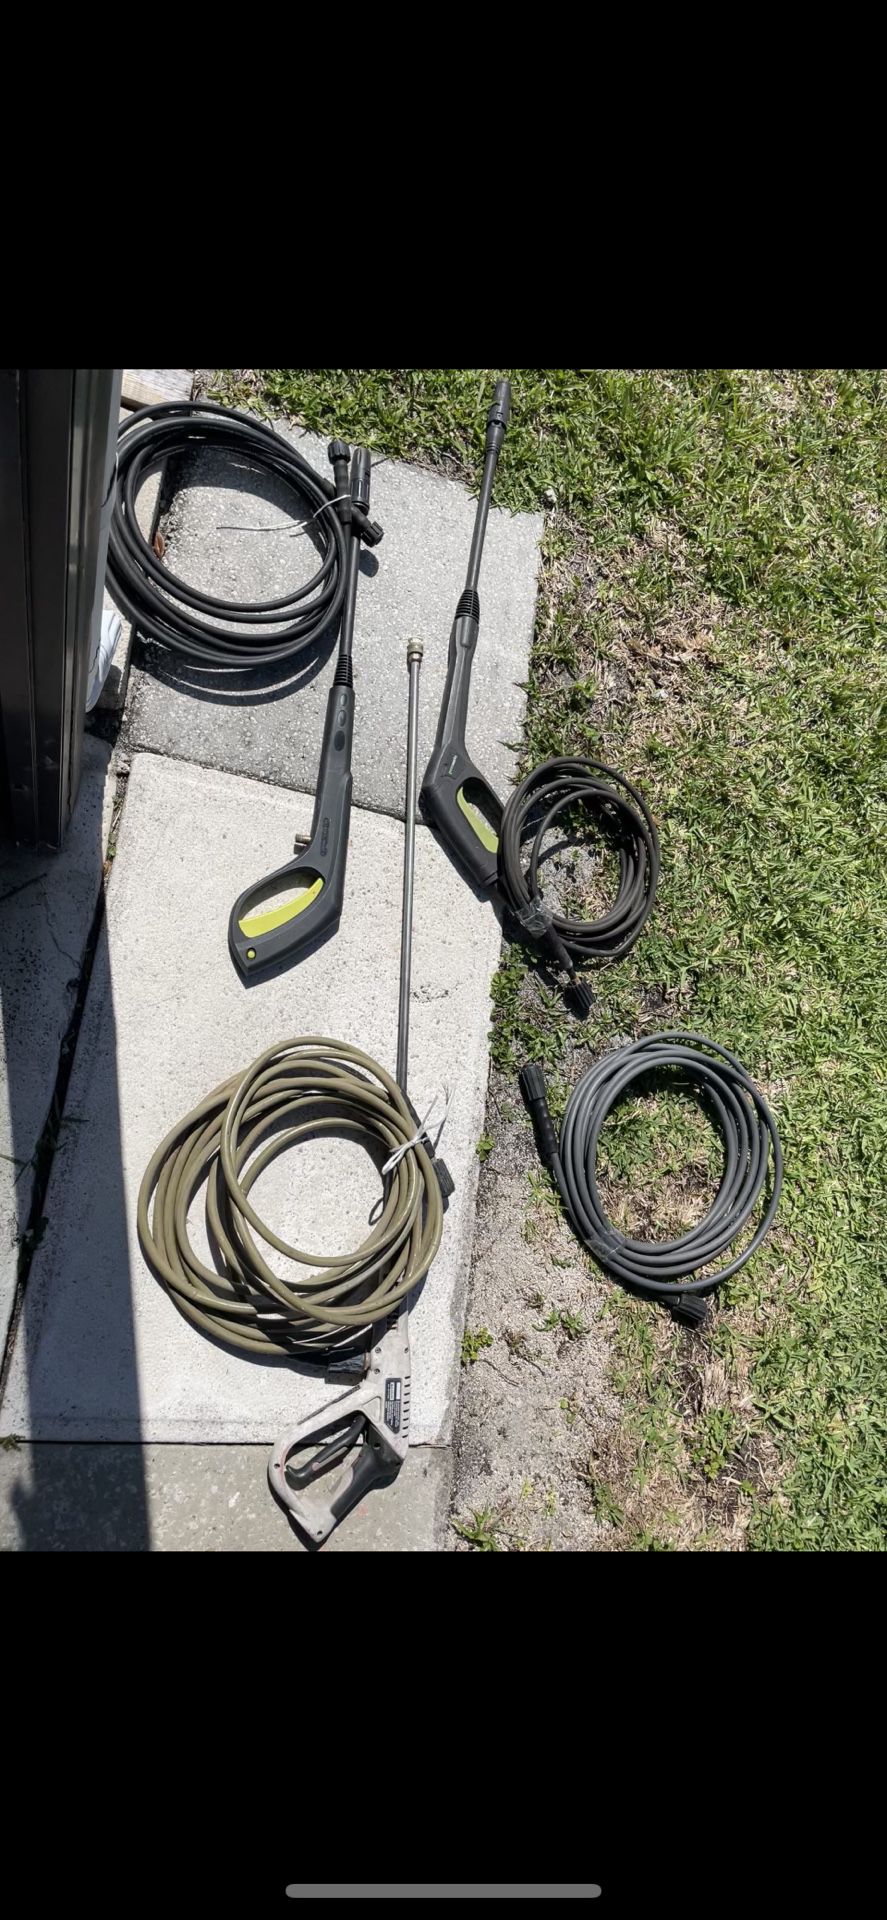 4 Electric Pressure, Washer, Hoses, And Three Wands everything is not been tested $40 for everything